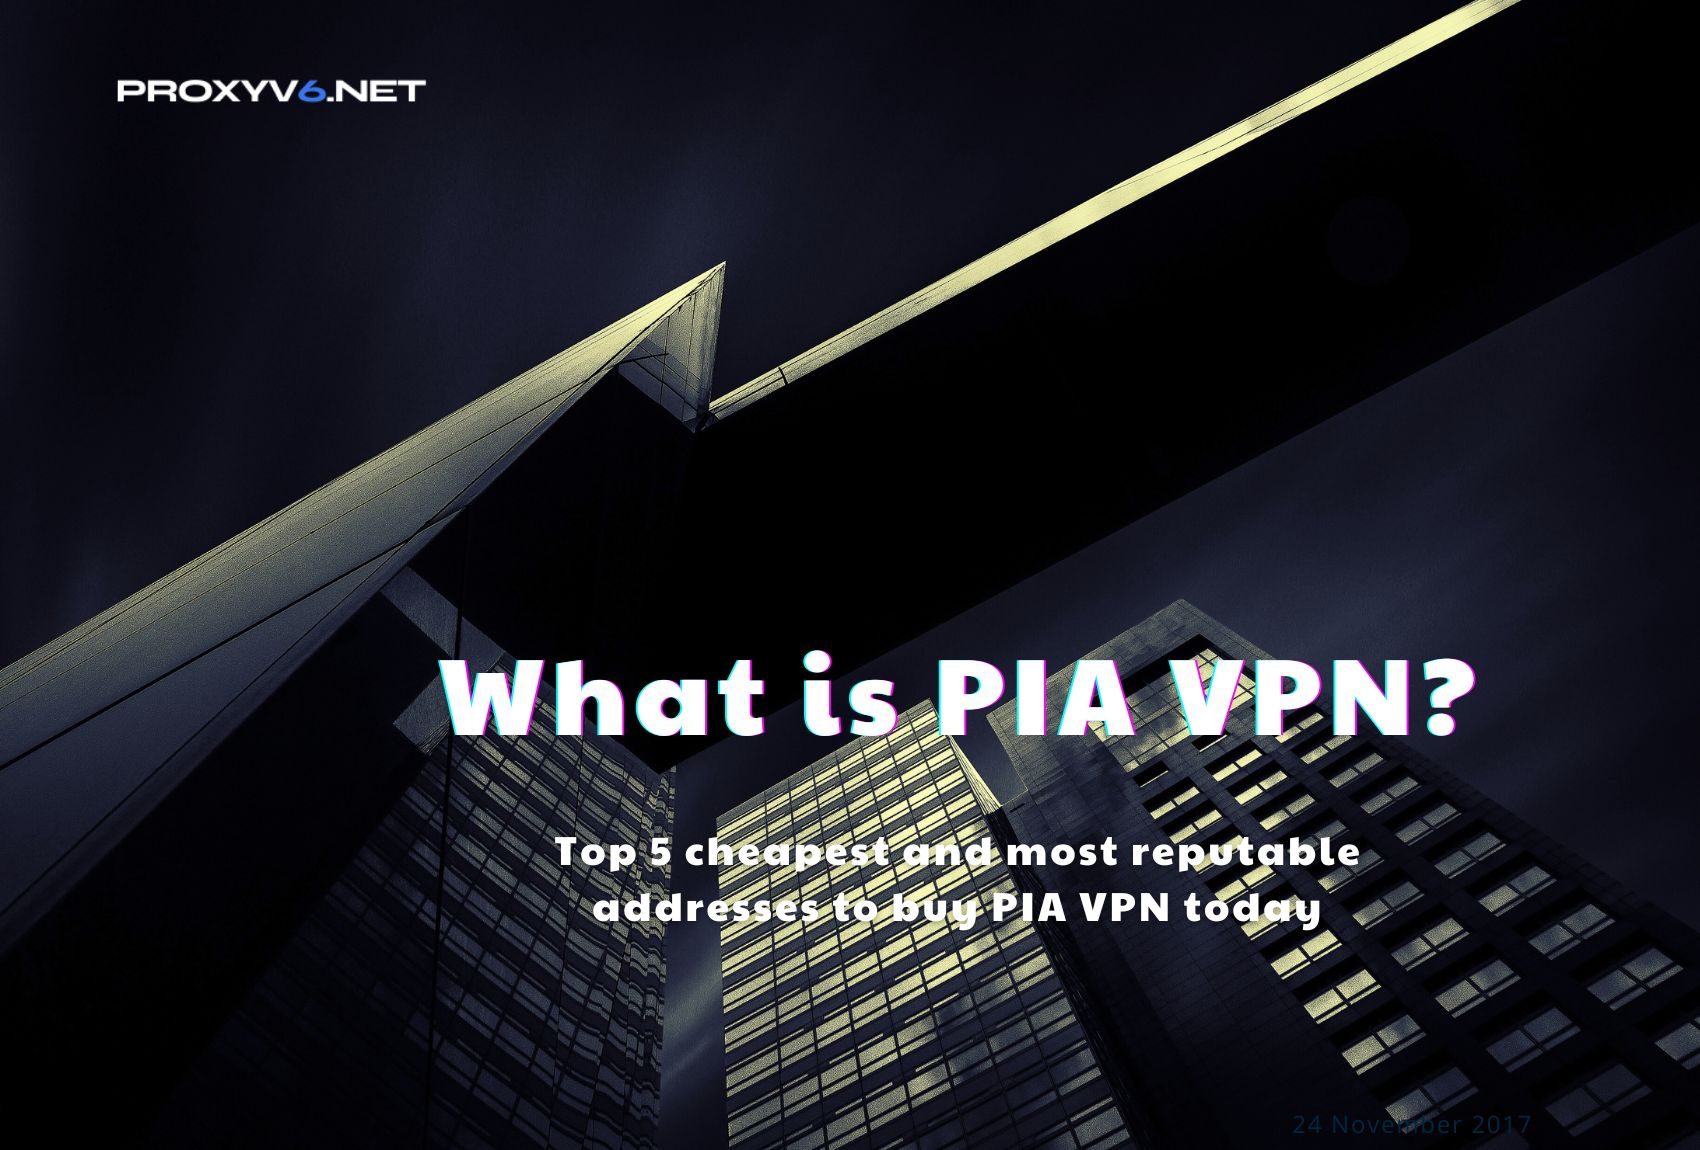 What is PIA VPN? Top 5 cheapest and most reputable addresses to buy PIA VPN today